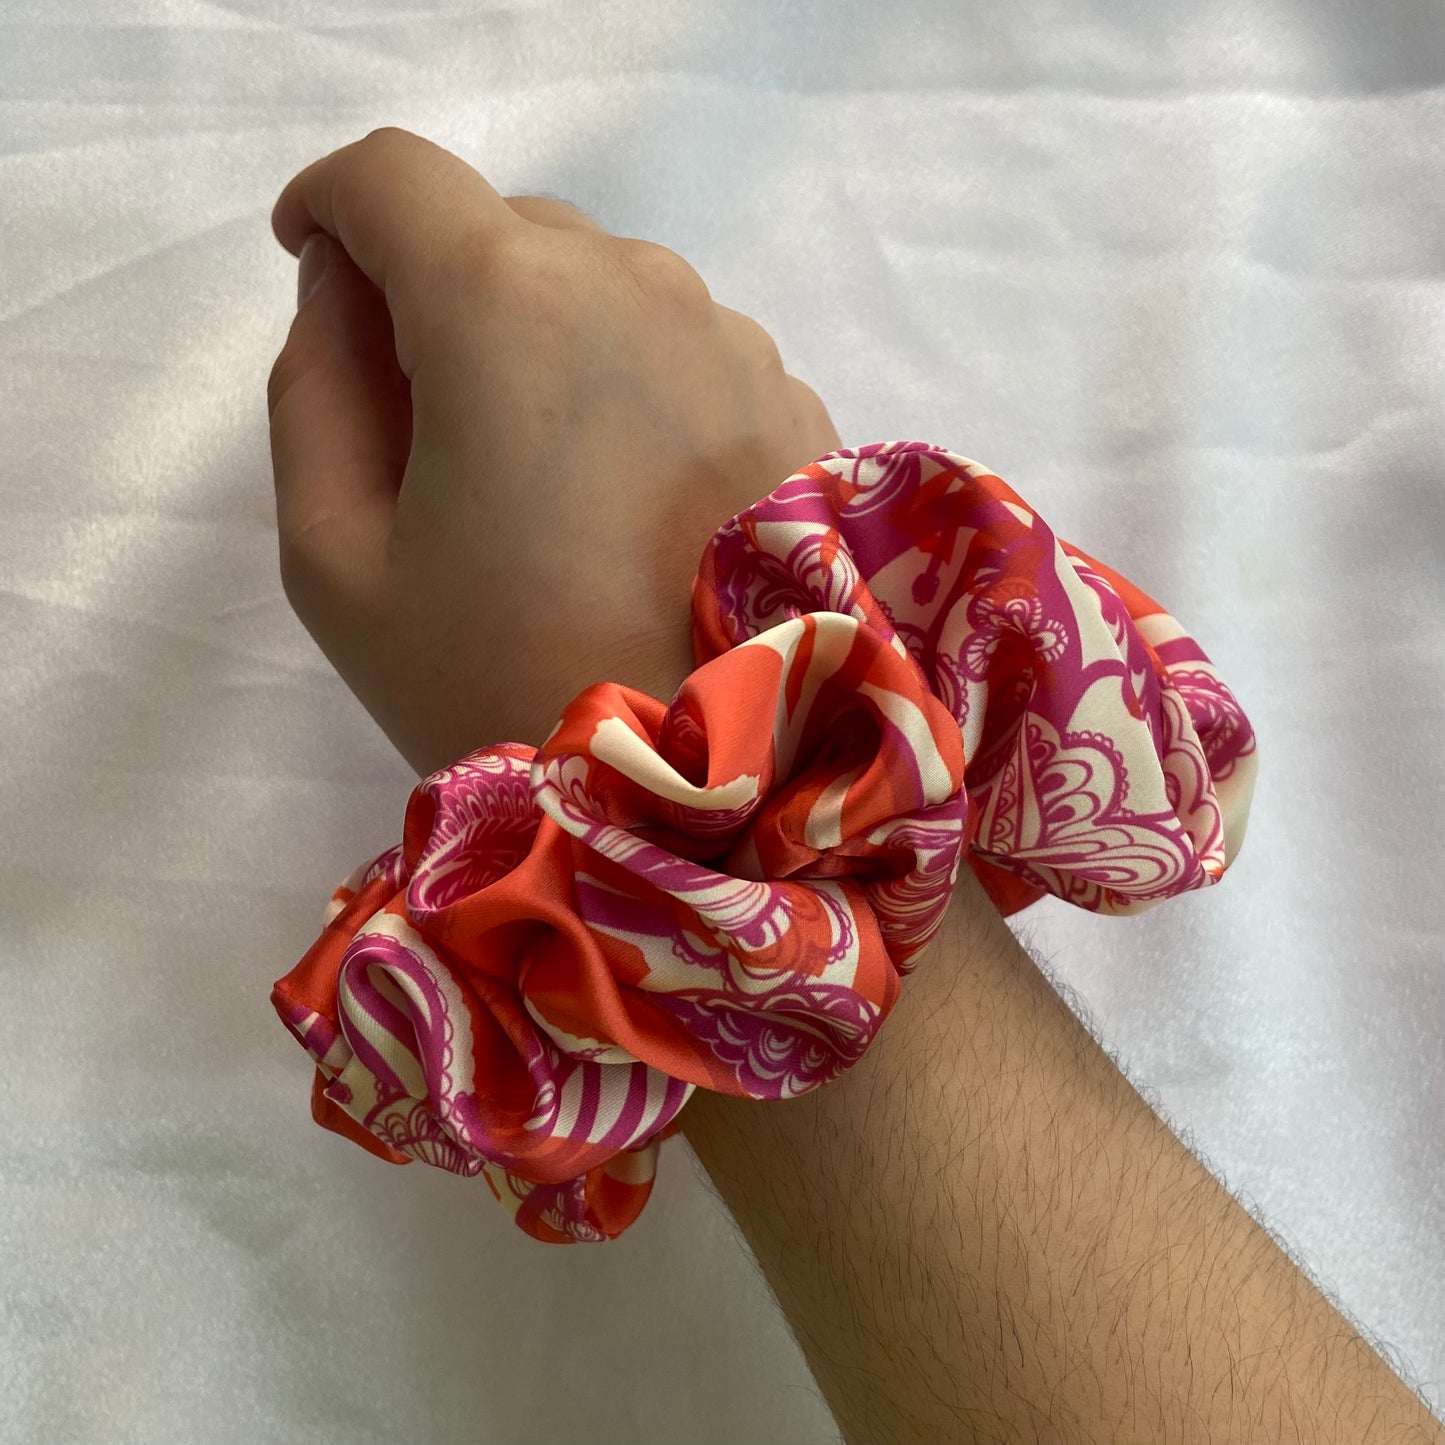 Colorful Scrunchies